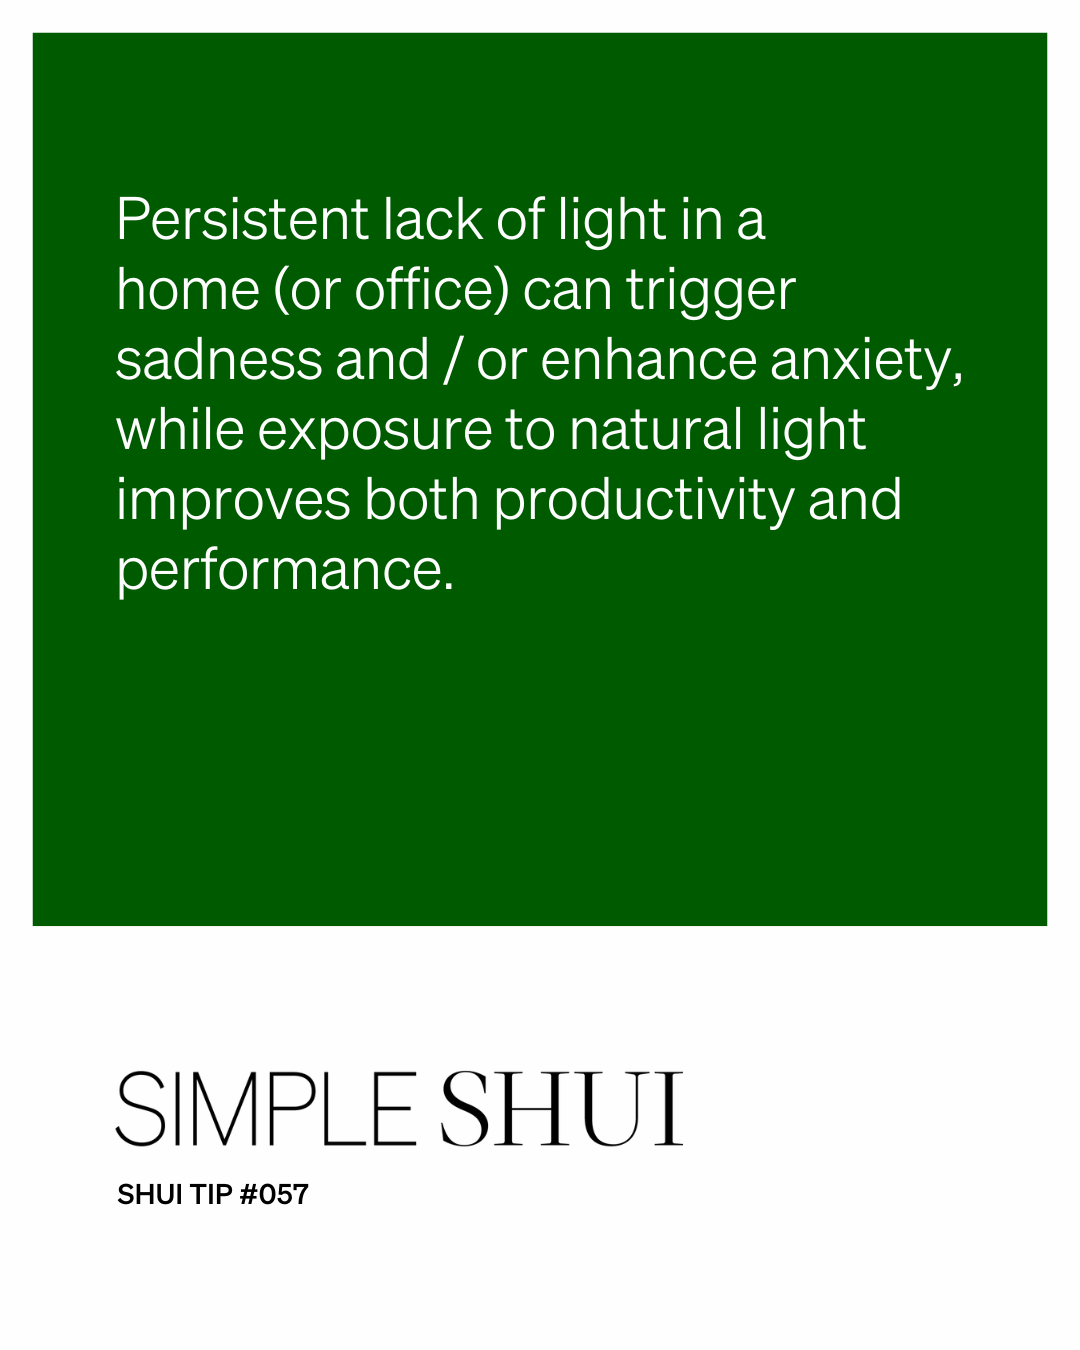 simple shui tip: let there be light!